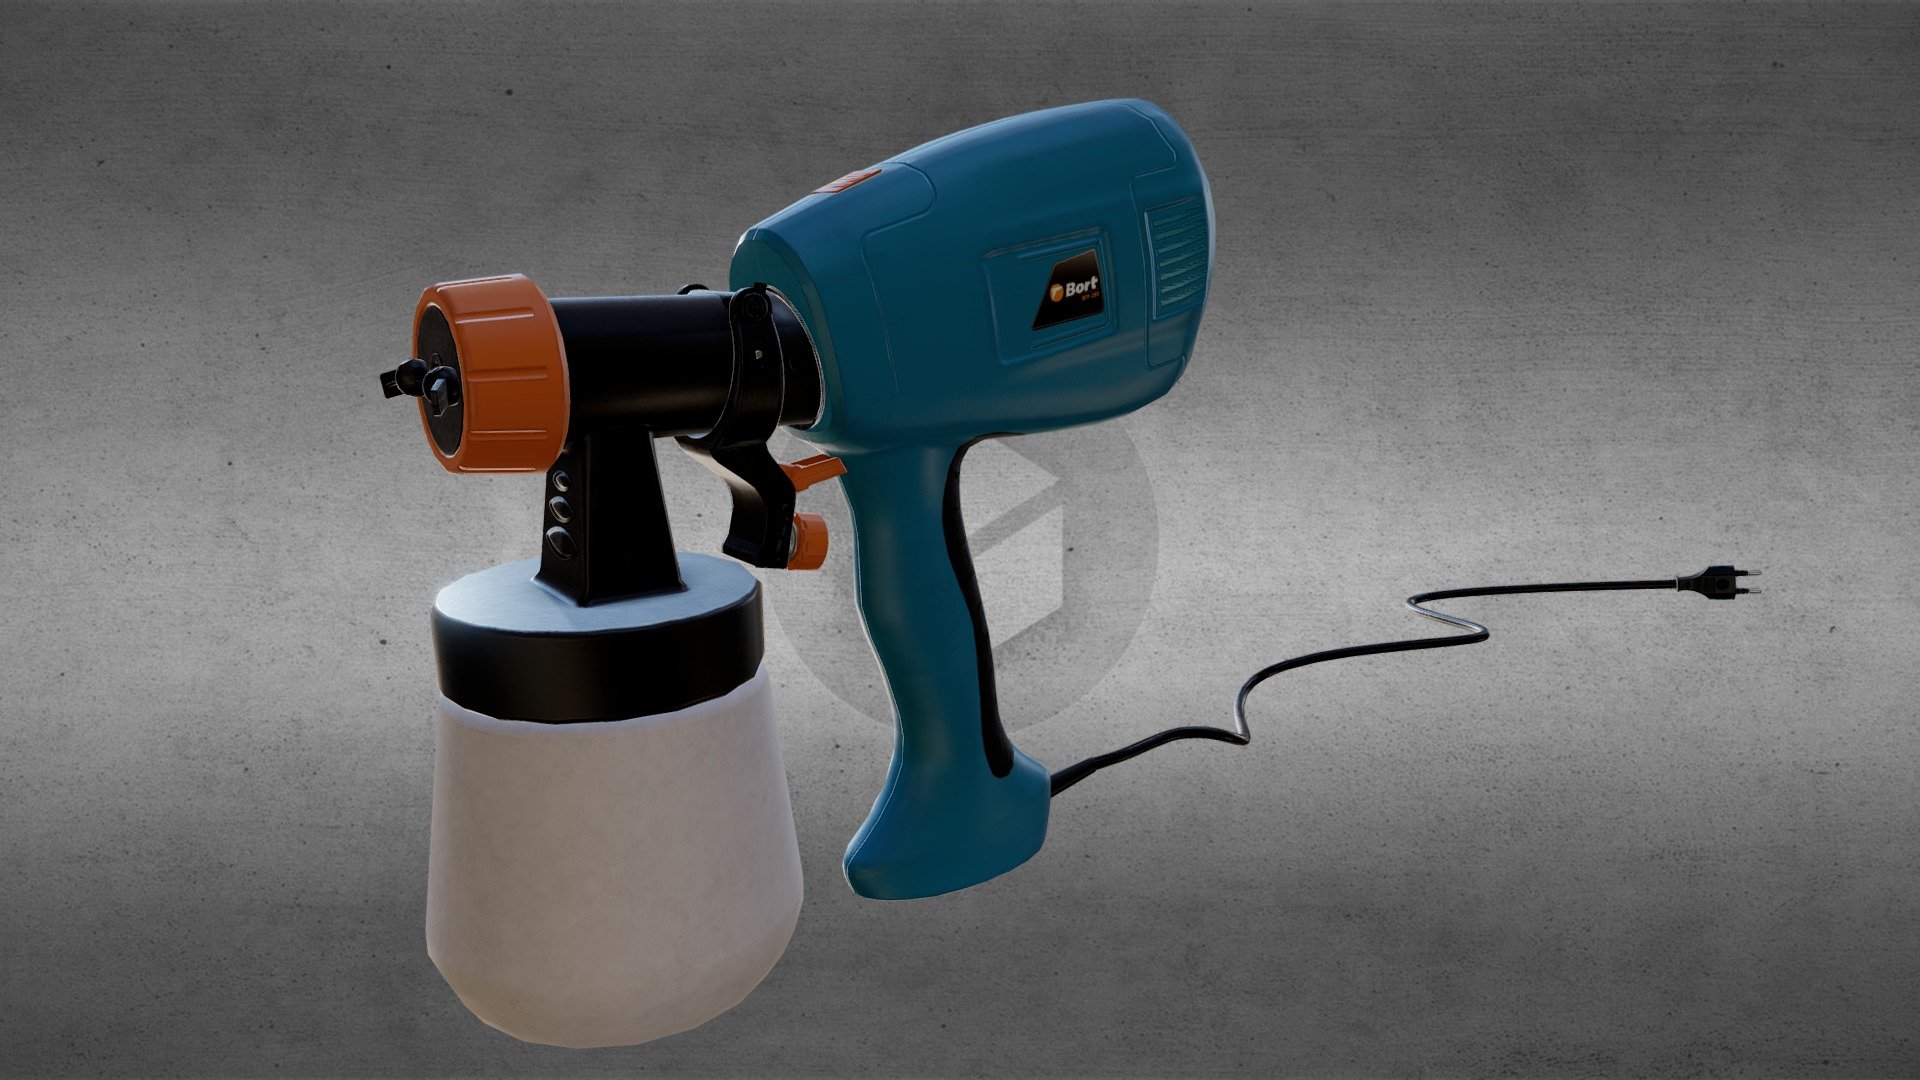 Decided to model a tool for painting - spray gun - 3D model by sergeykuchmin 3d model